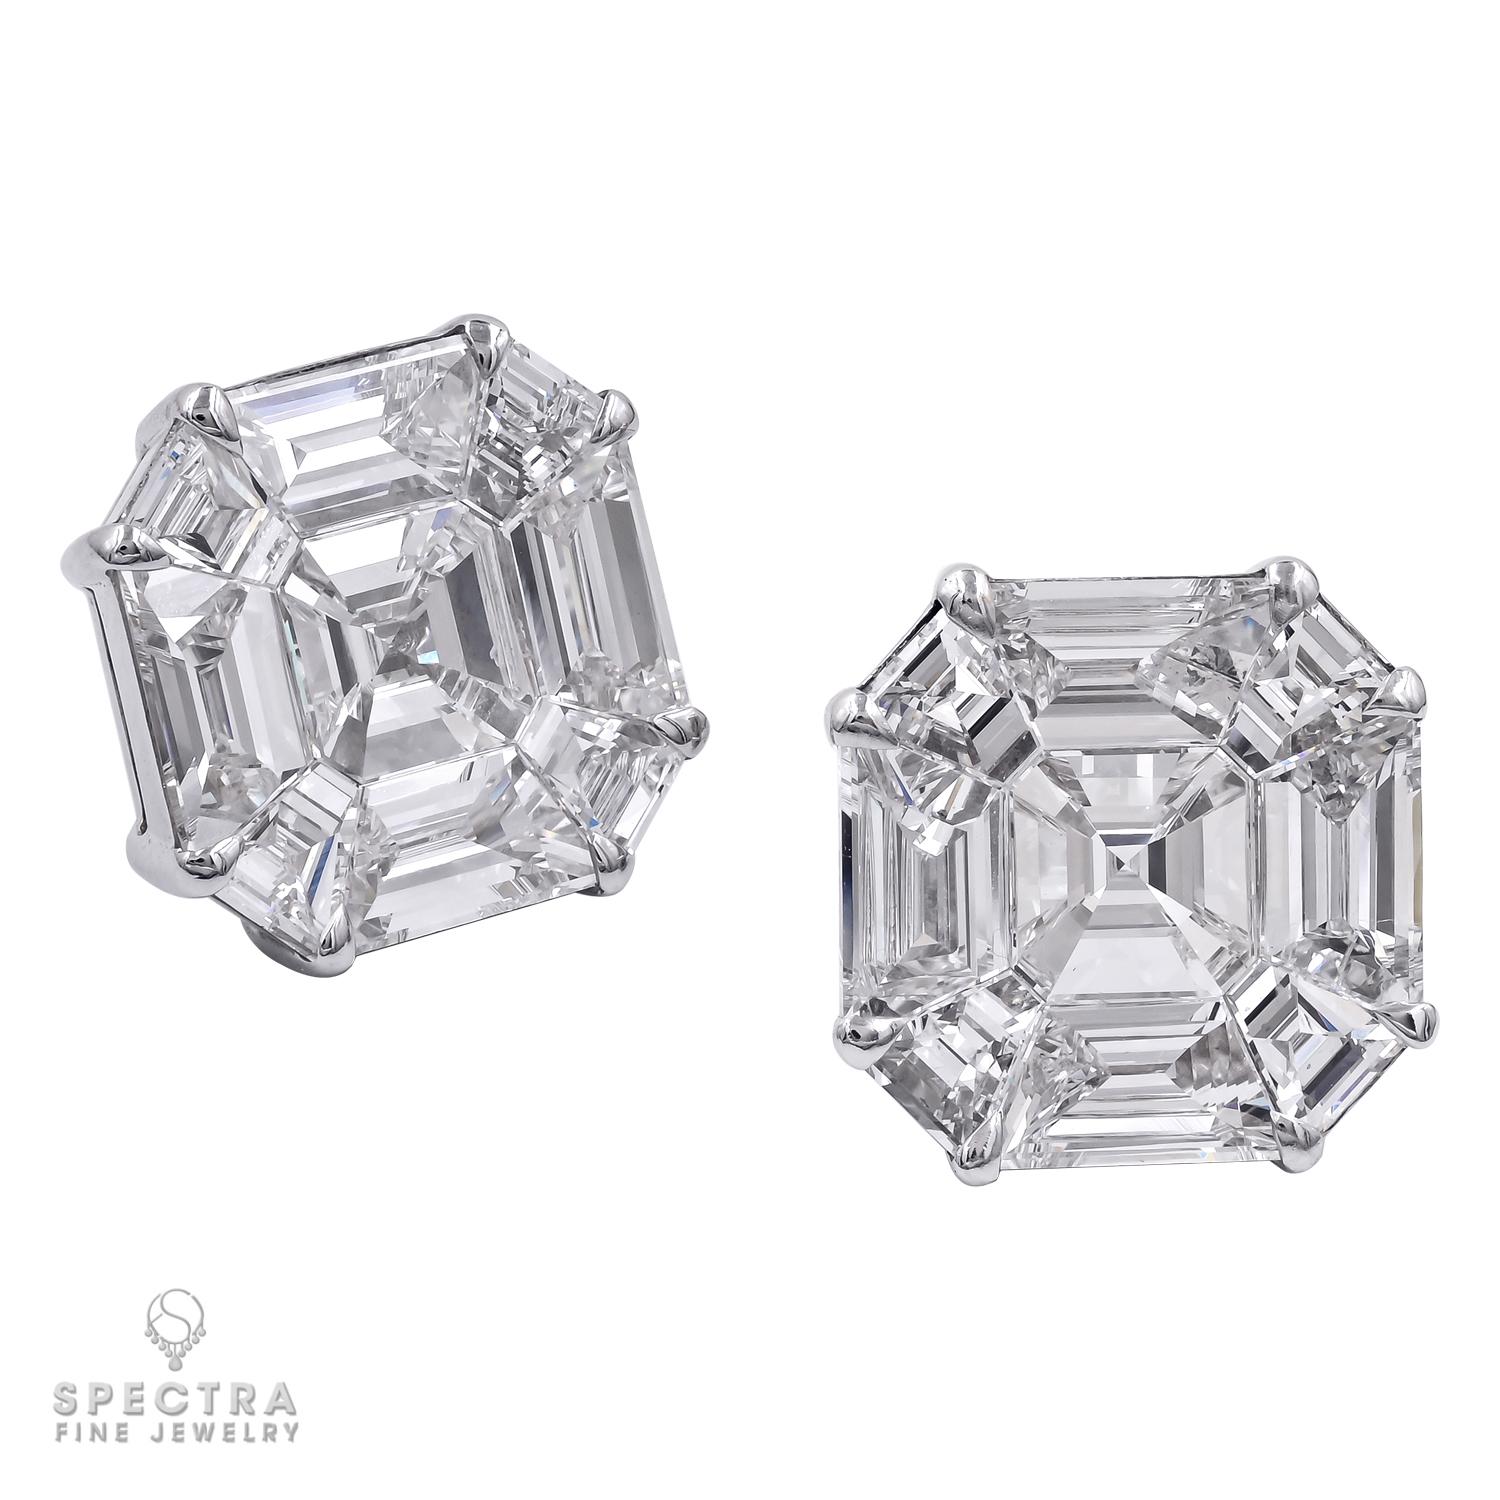 These Spectra Fine Jewelry Illusion Asscher-shape Diamond Stud Earrings, made in the 21st century, suggest something much larger. Crafted in 18K white gold, the pair of earrings has an estimated diamond-carat weight of 10.74. The arresting pair has